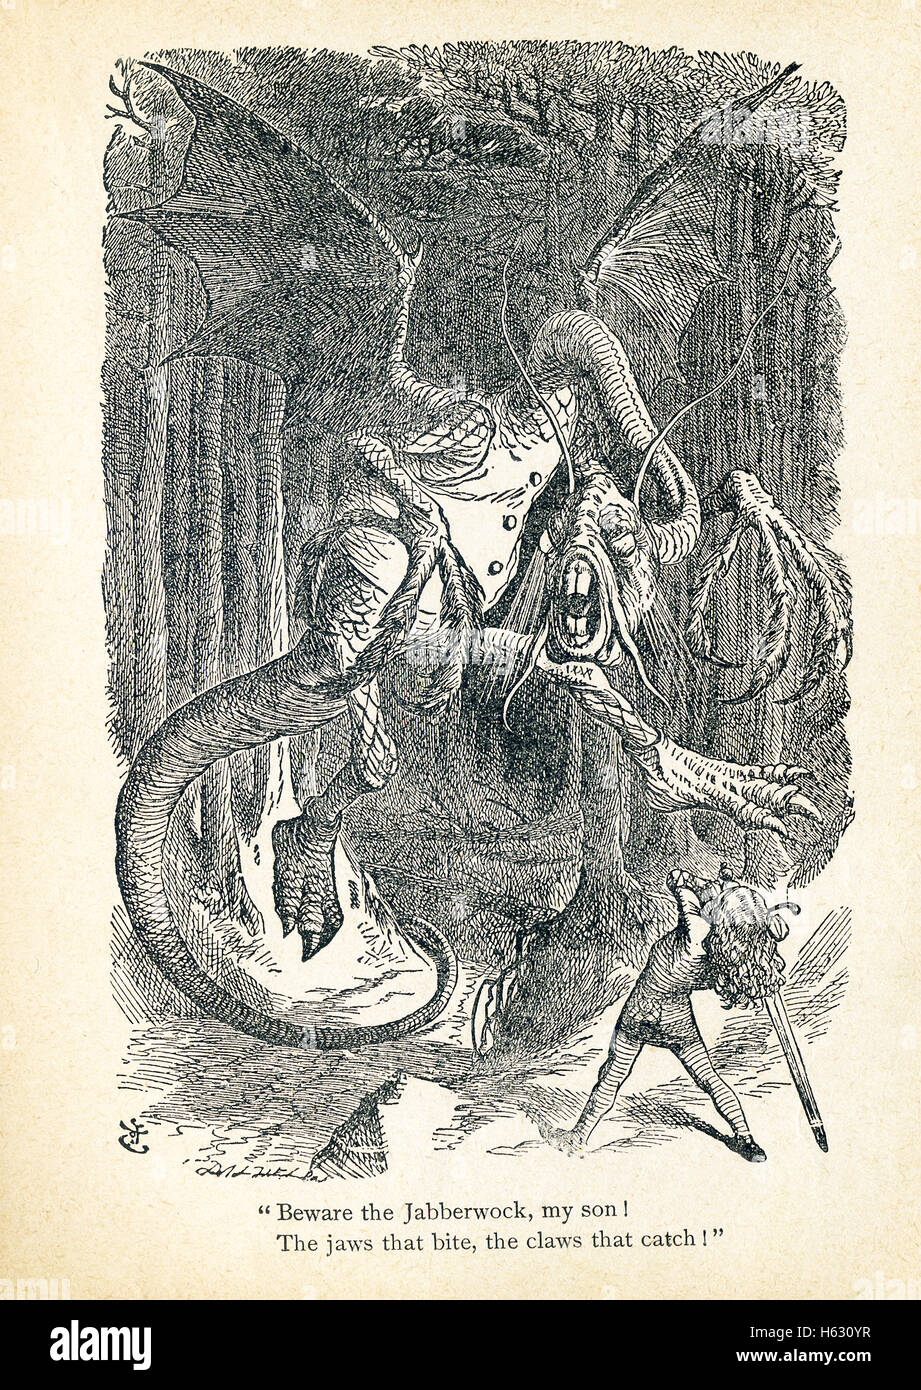 This is a scene from what Alice saw once she went through the Looking Glass and into the Looking Glass room in Lewis Carroll's "Through the Looking Glass." It shows the Jabberwock, and the caption reads, "Beware the Jabberwock, my son! The jaws that bite, the claws that catch." The Jabberwock is a monster, and the nonsense poem about killing this monster is called "Jabberwocky." Stock Photo